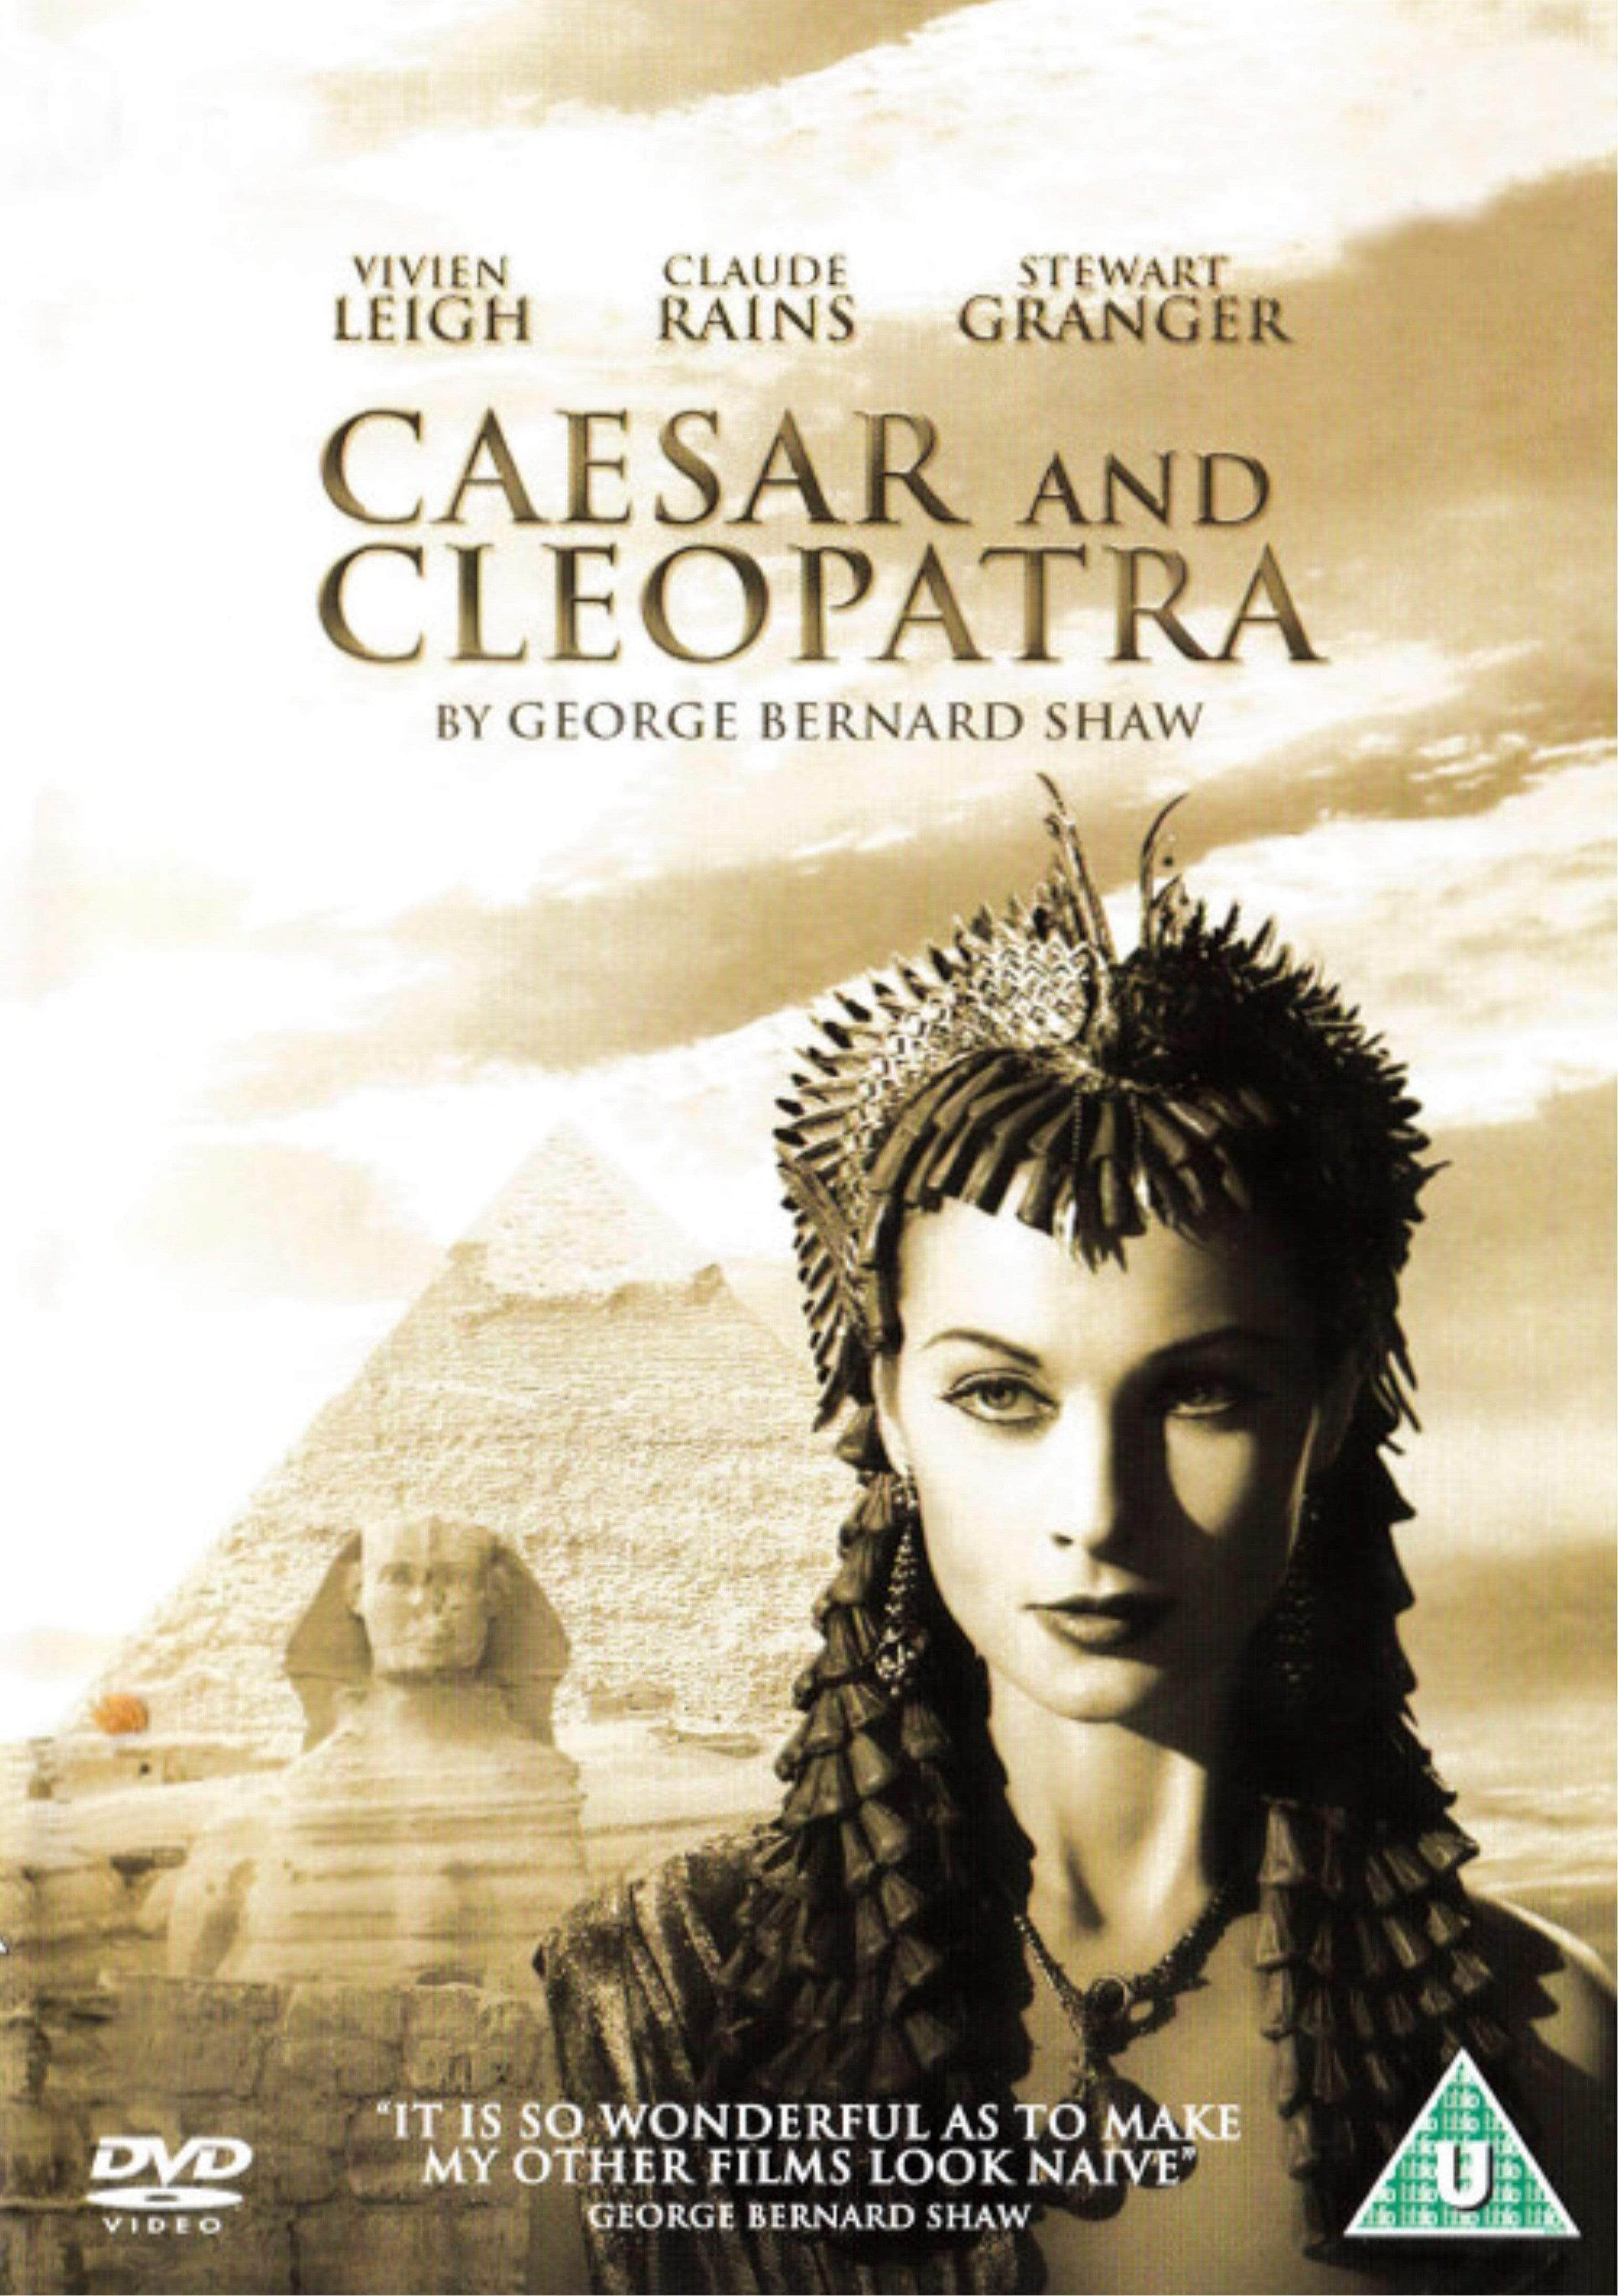 DVD　Caesar　Movies　and　Shop　Cleopatra　(1945)　Old　Classic